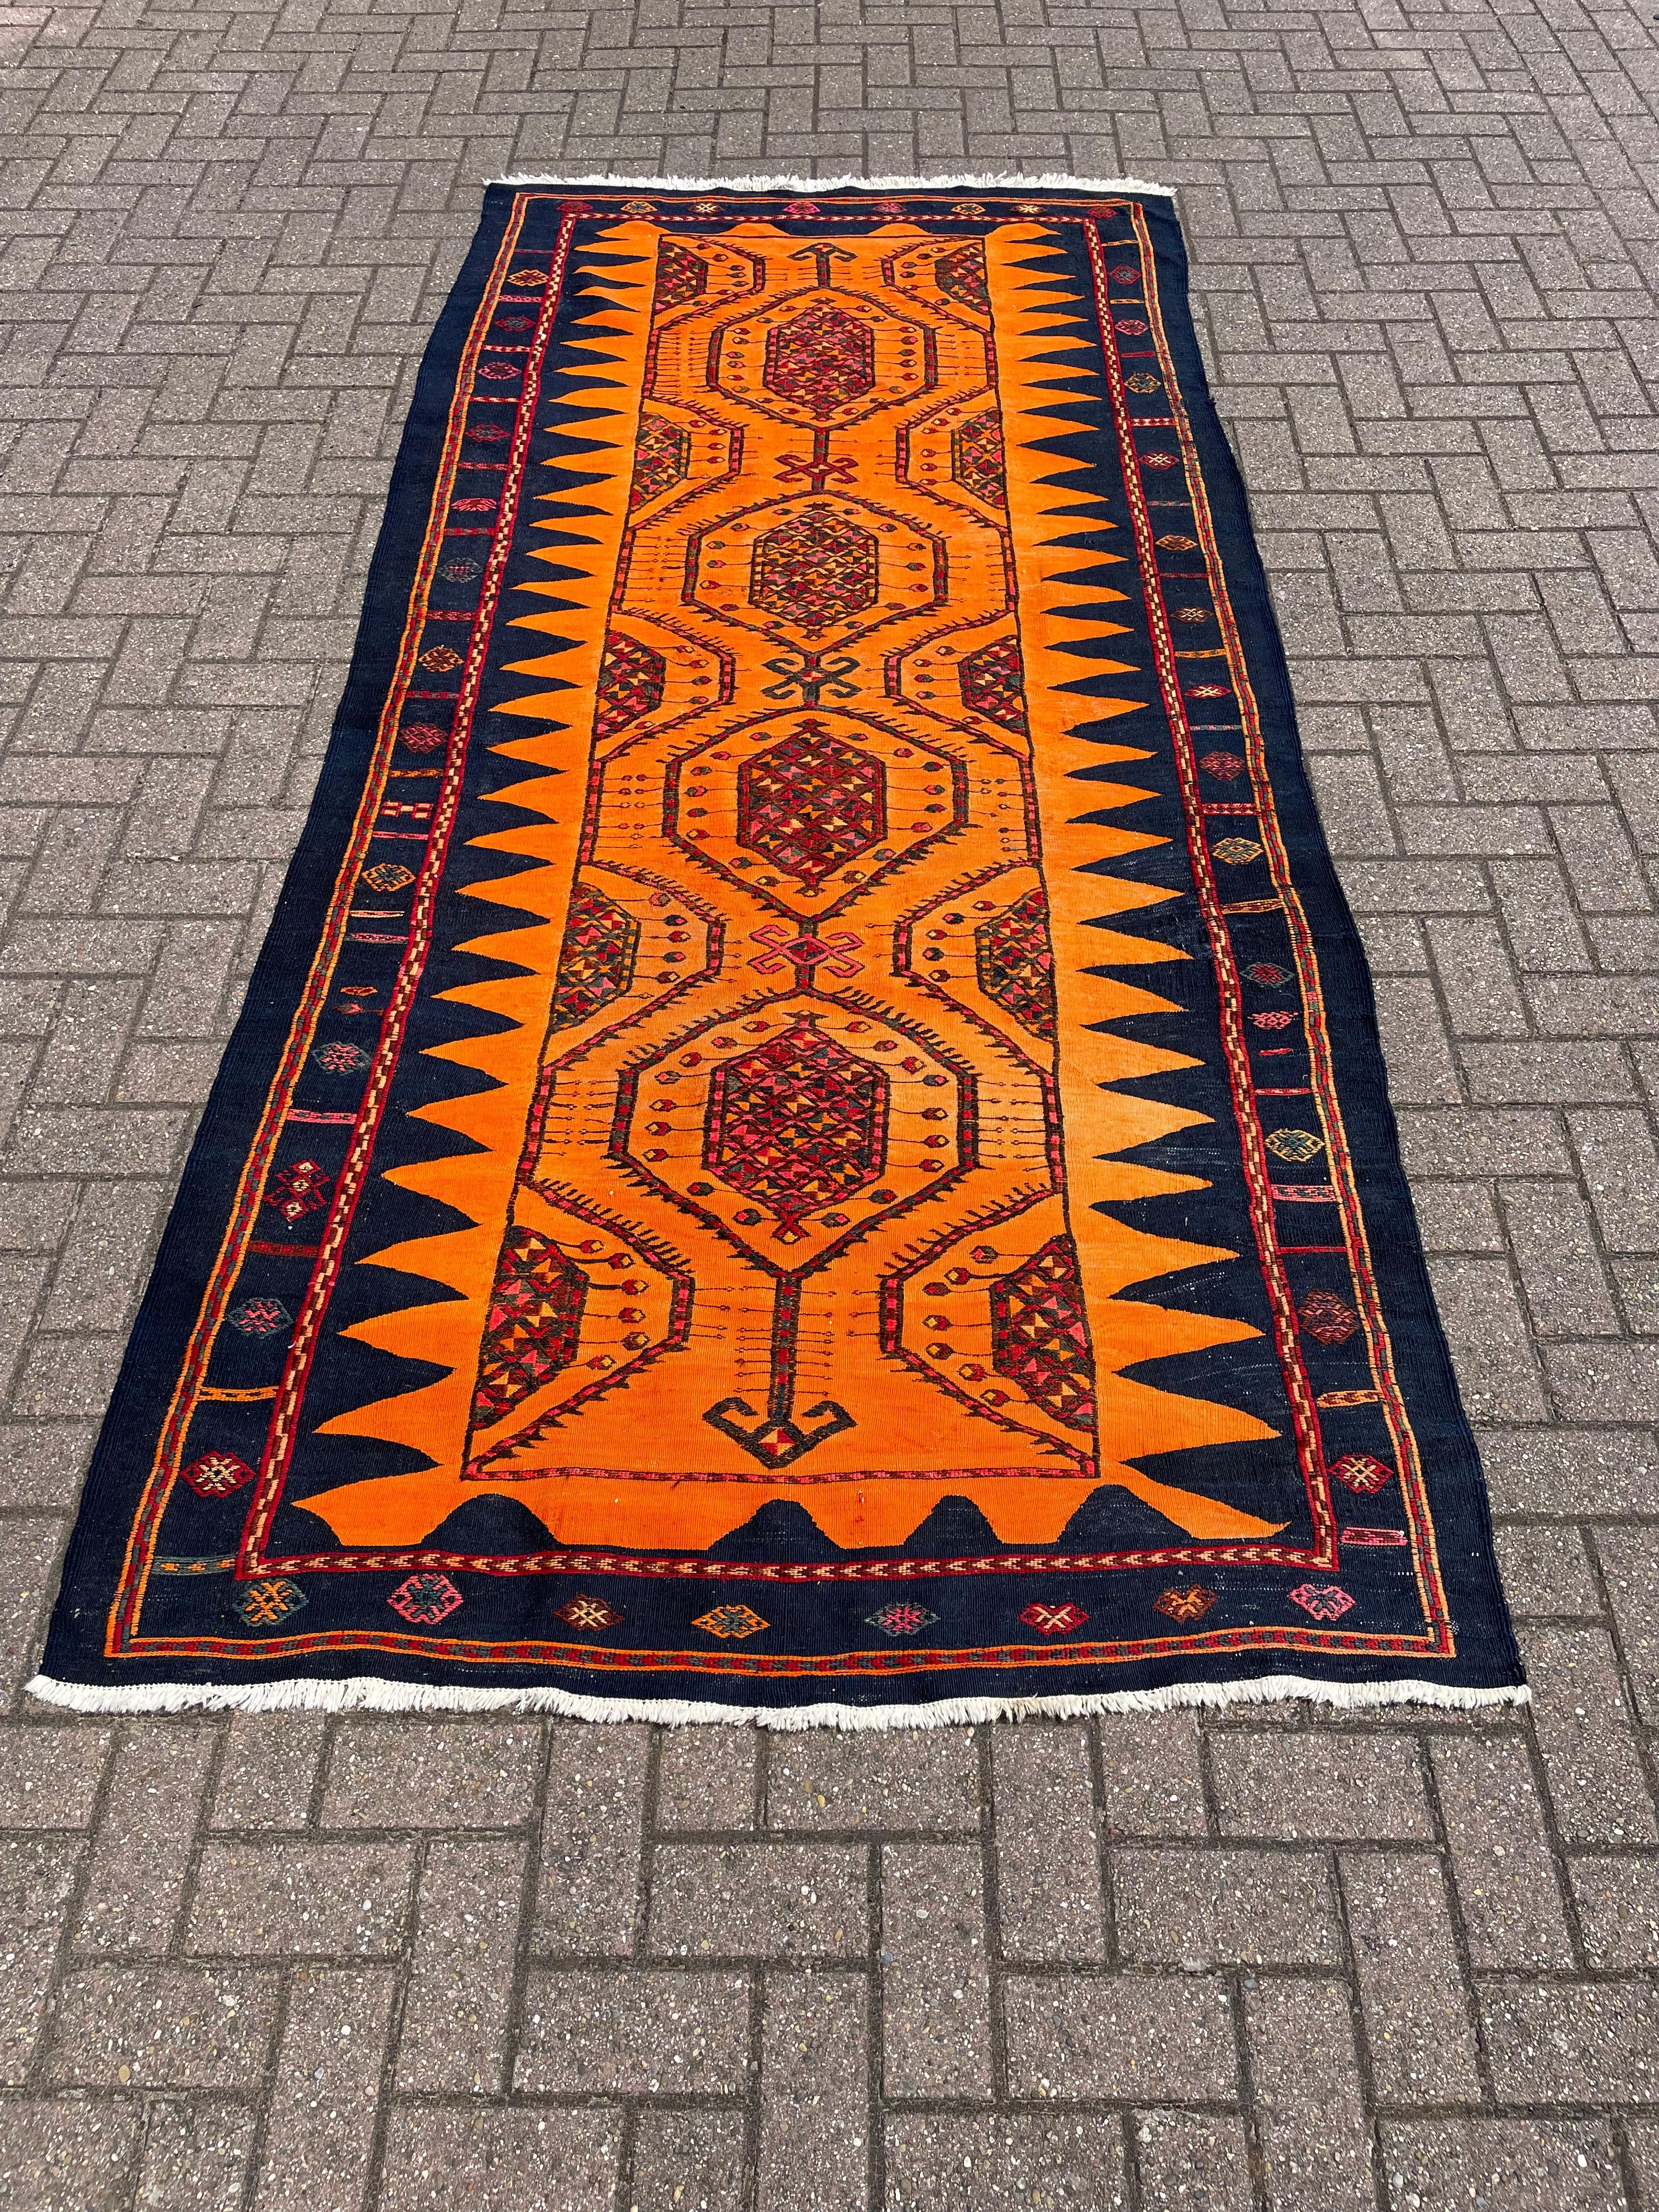 Ideal size, great looking and wonderful condition rug.

When it comes to decorating the floors of your home we cannot think of a better way then with good quality and clean rugs. Over the past 5 years this particular kind of rug (Kilim) has become